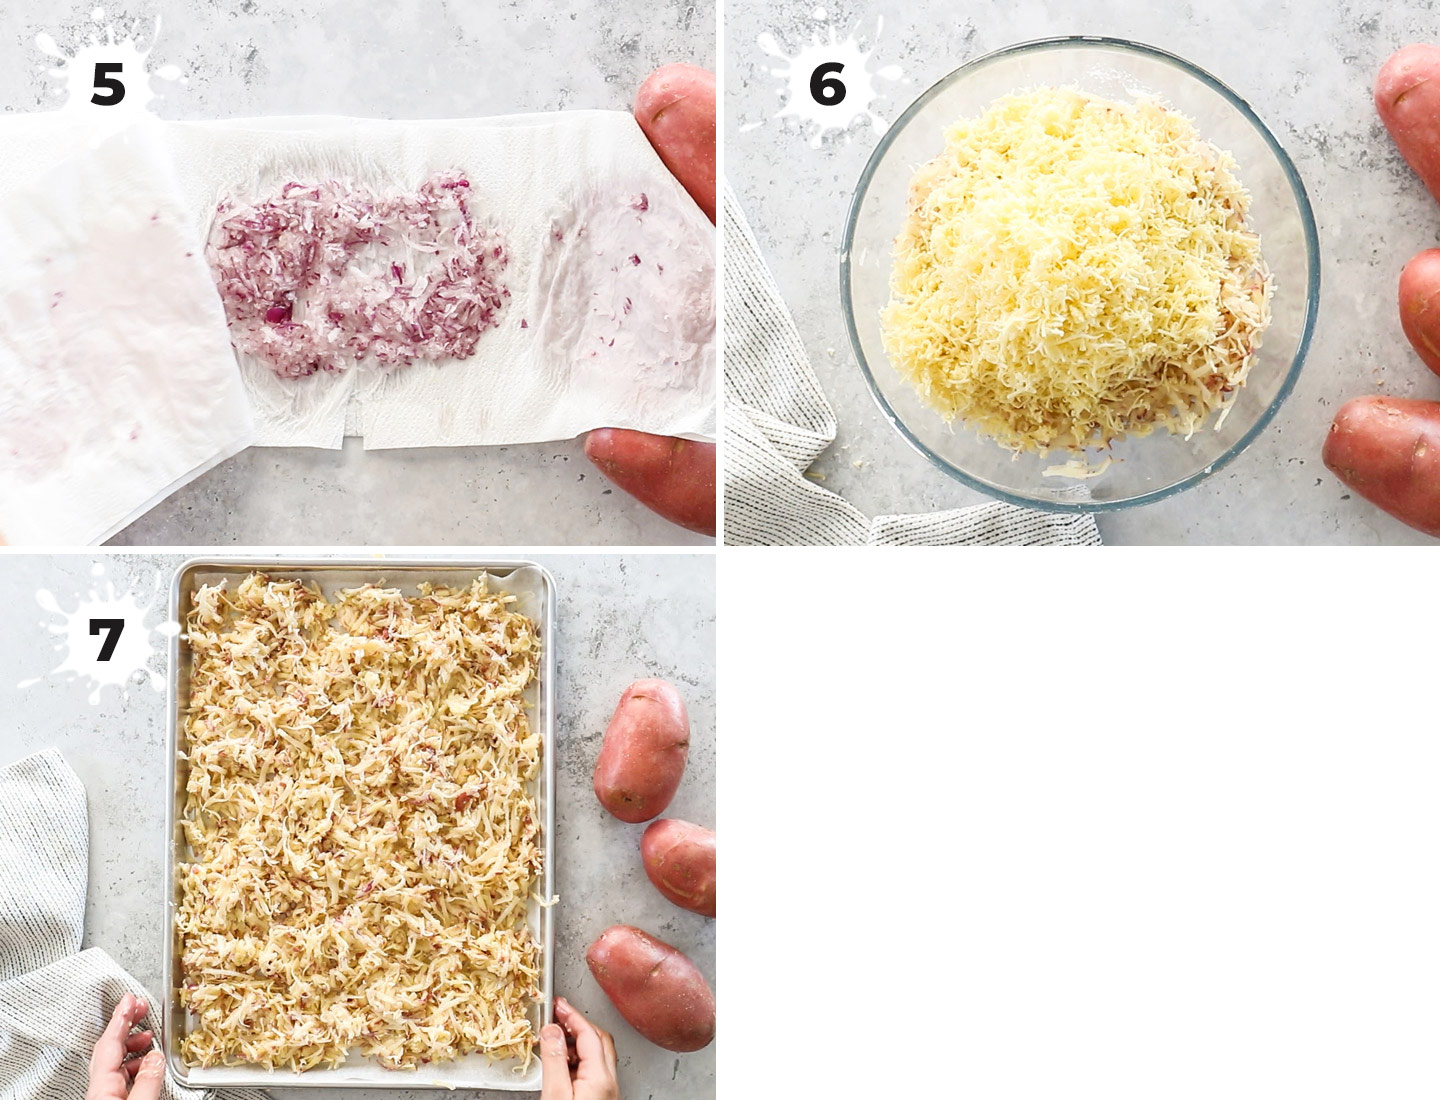 A collage showing how to assemble and bake the hash browns.